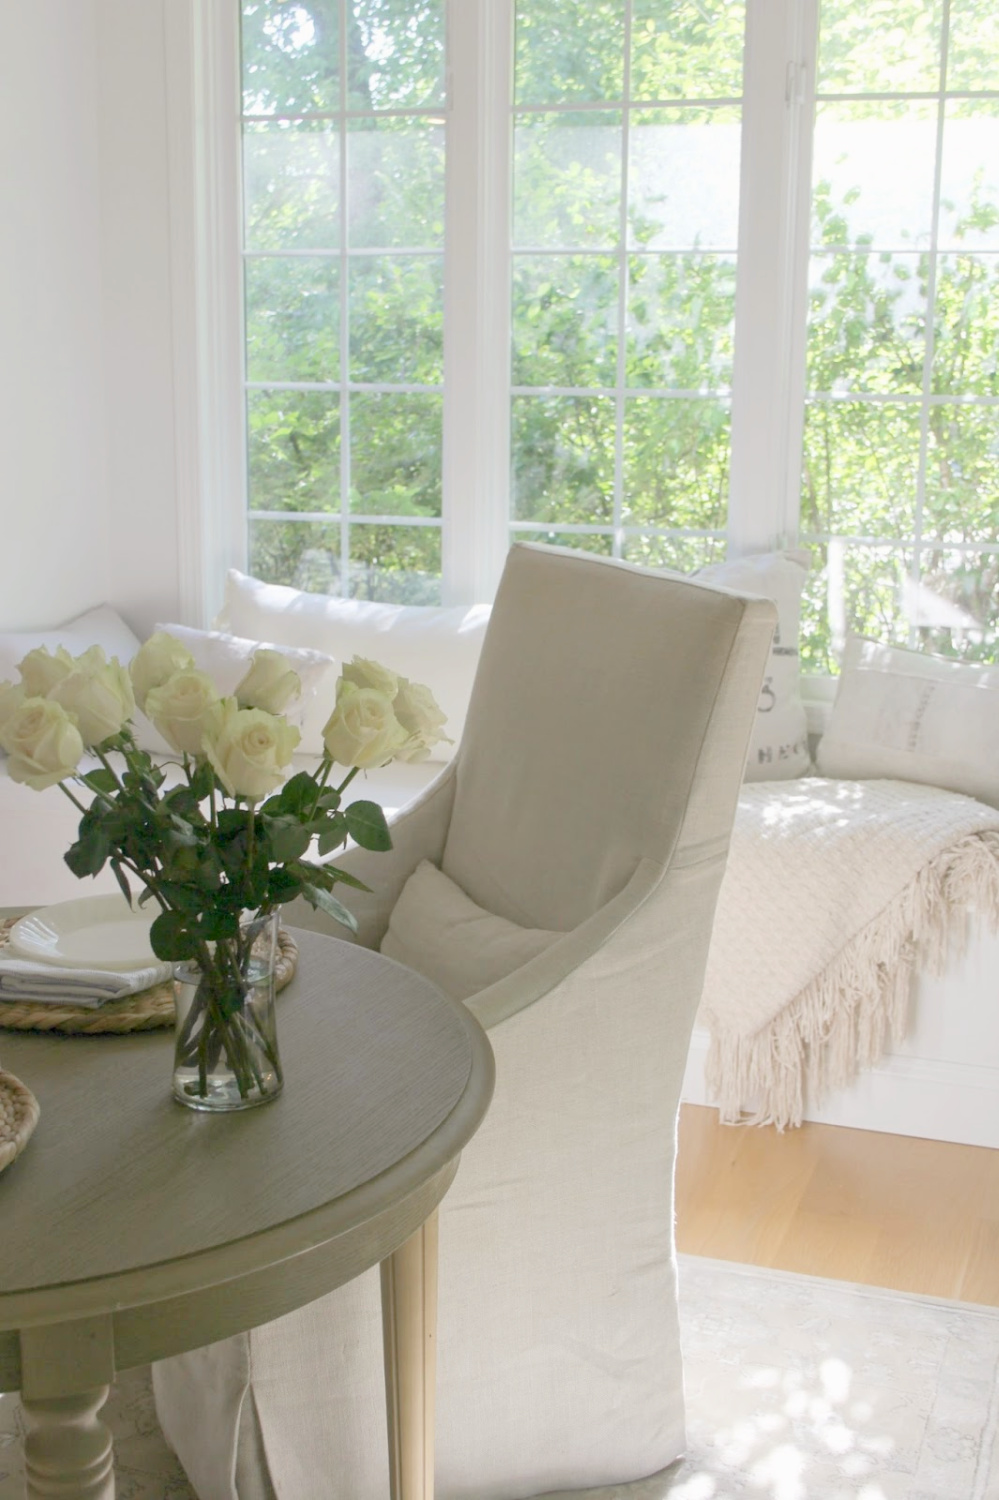 Belgian linen slipcovered slope arm dining chair and window seat in breakfast nook - Hello Lovely Studio.